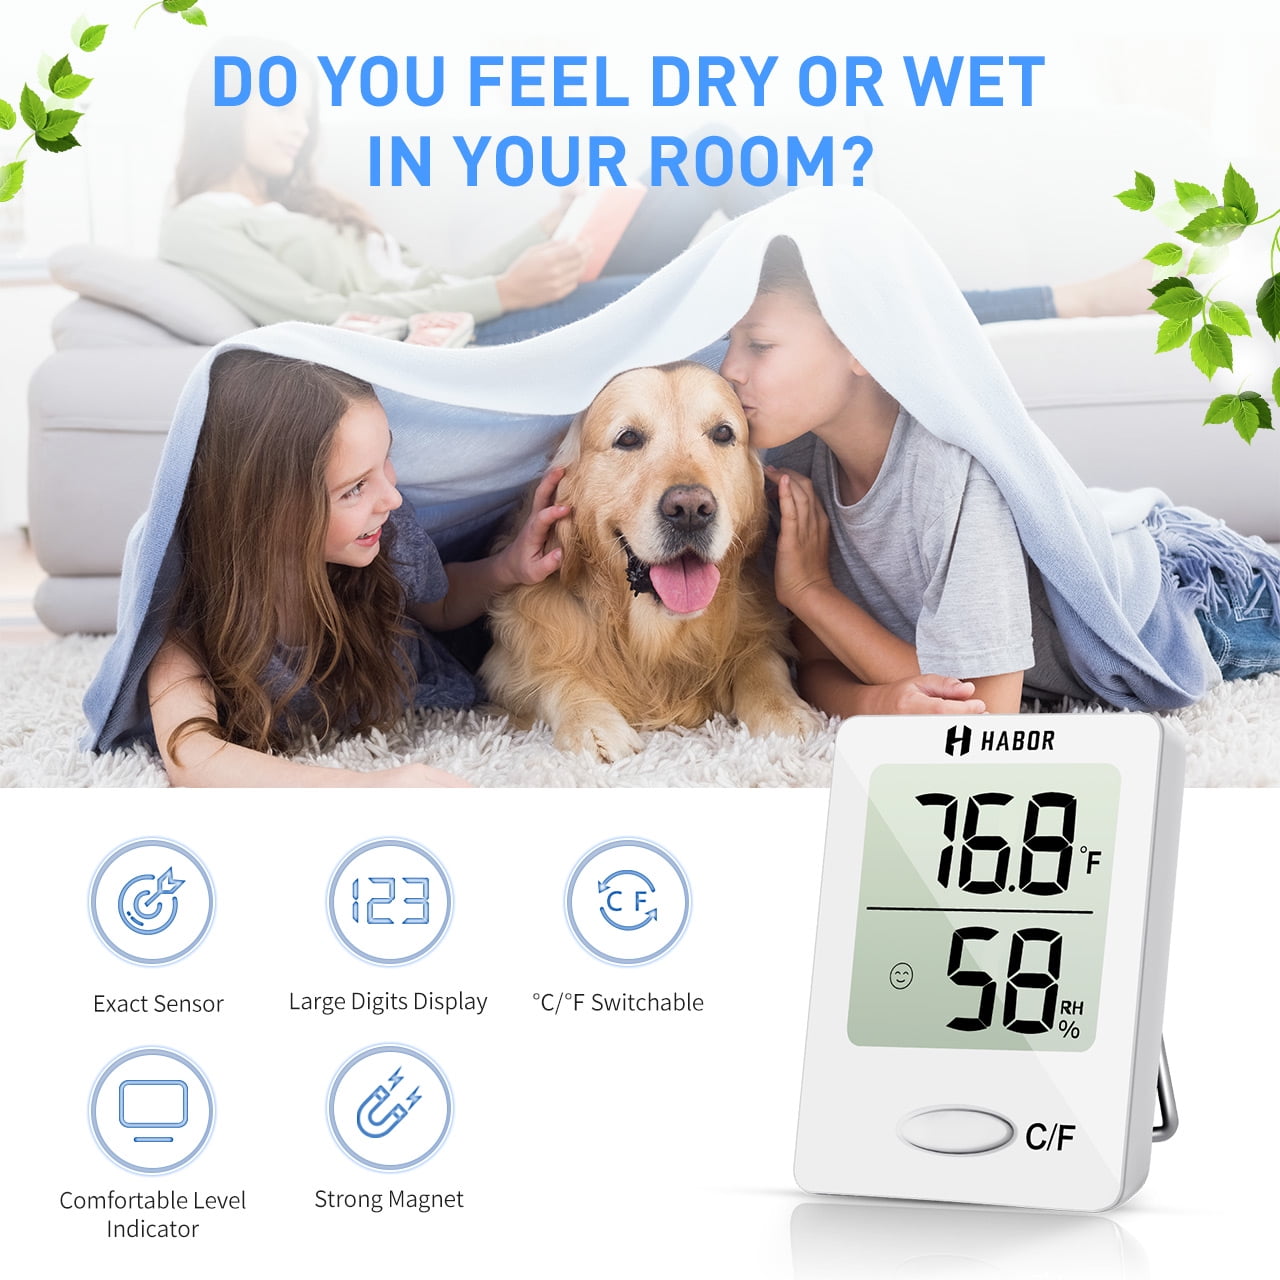 hoyiours Room Thermometer Indoor Hygrometer, Humidity Meter Digital  Thermometer for Room Temperature, Humidity Sensor Temperature and Humidity  Gauge